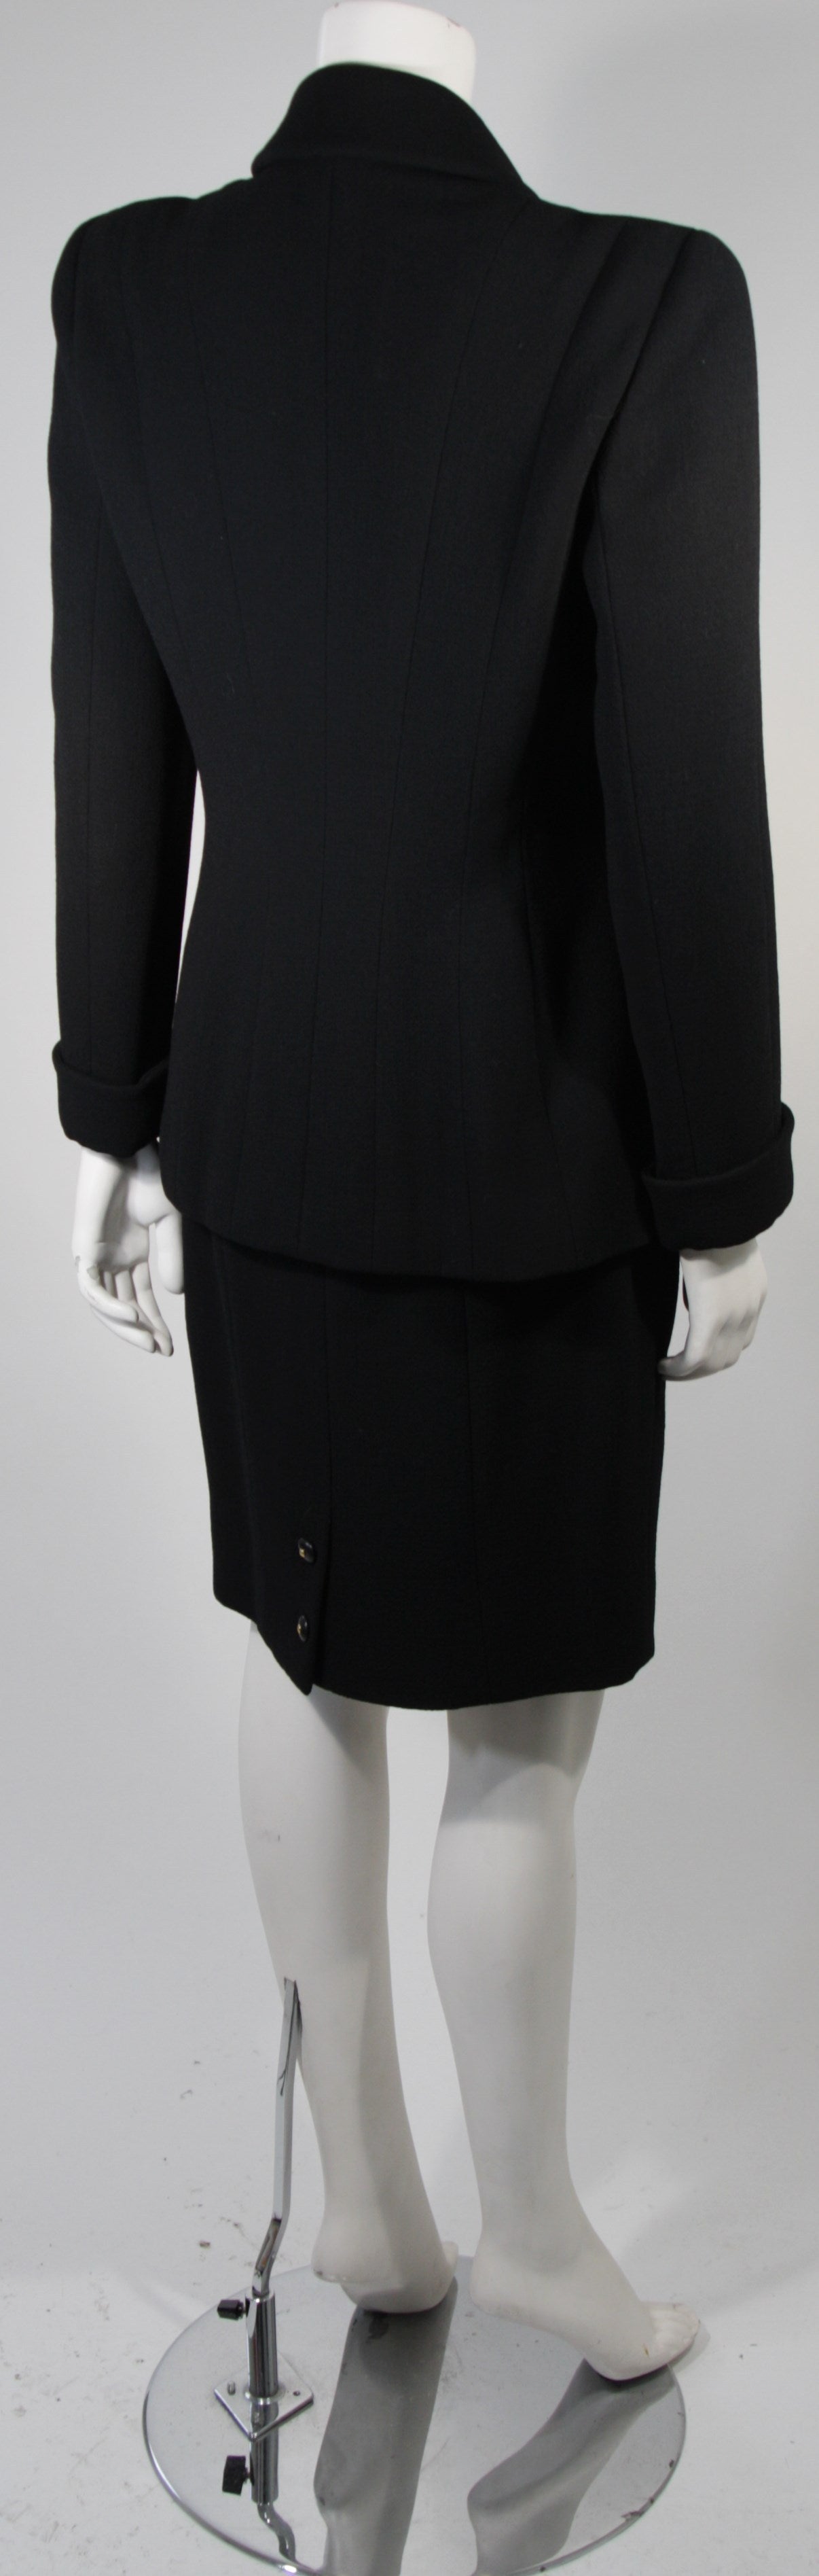 Chanel Black Wool Skirt Suit Size Military Inspired with Peter Pan Collar sz 8 2